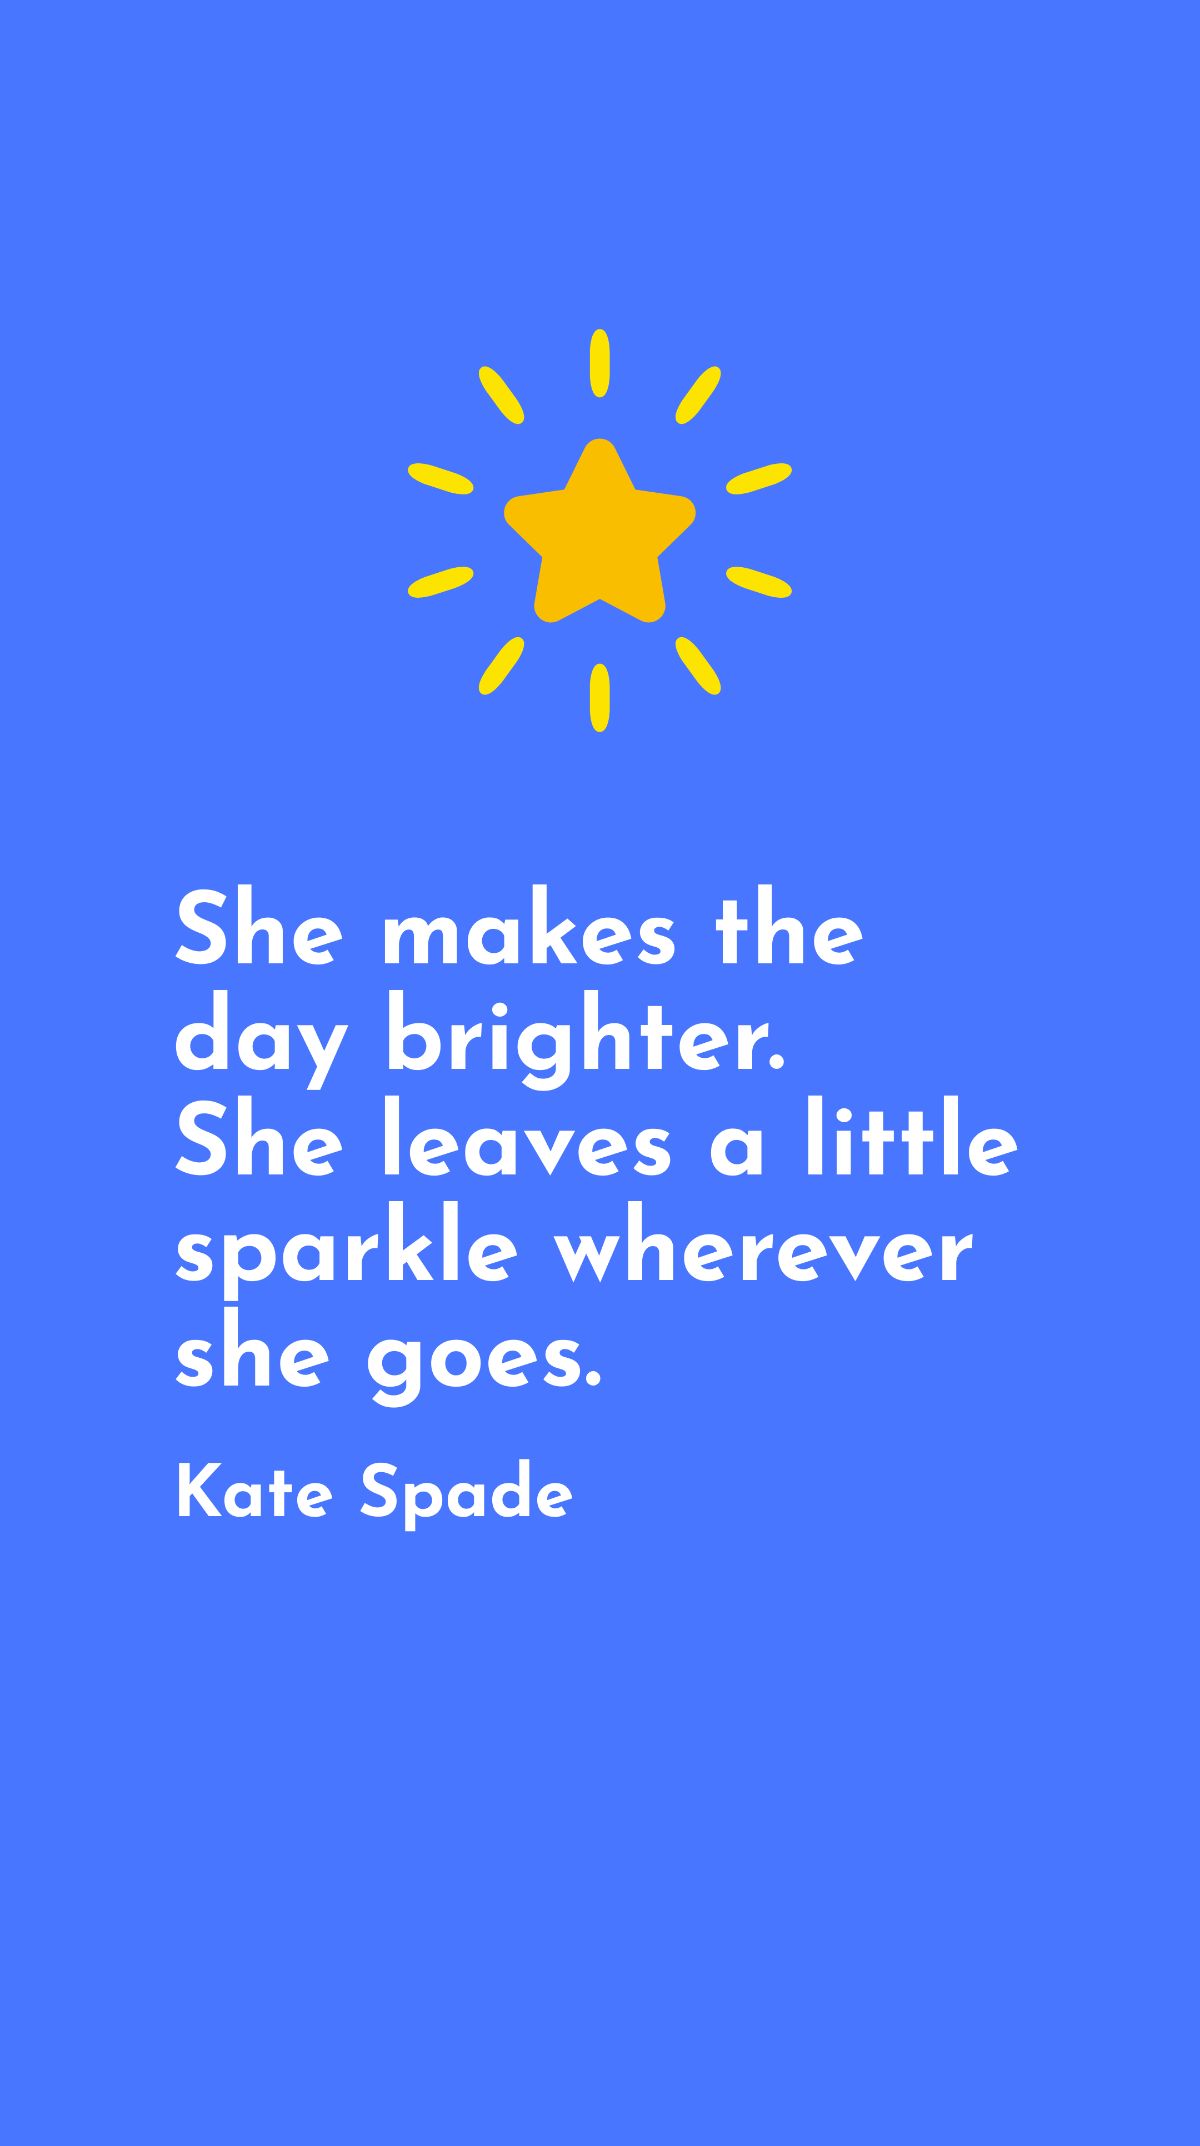 Free Kate Spade - She makes the day brighter. She leaves a little sparkle wherever she goes. Template